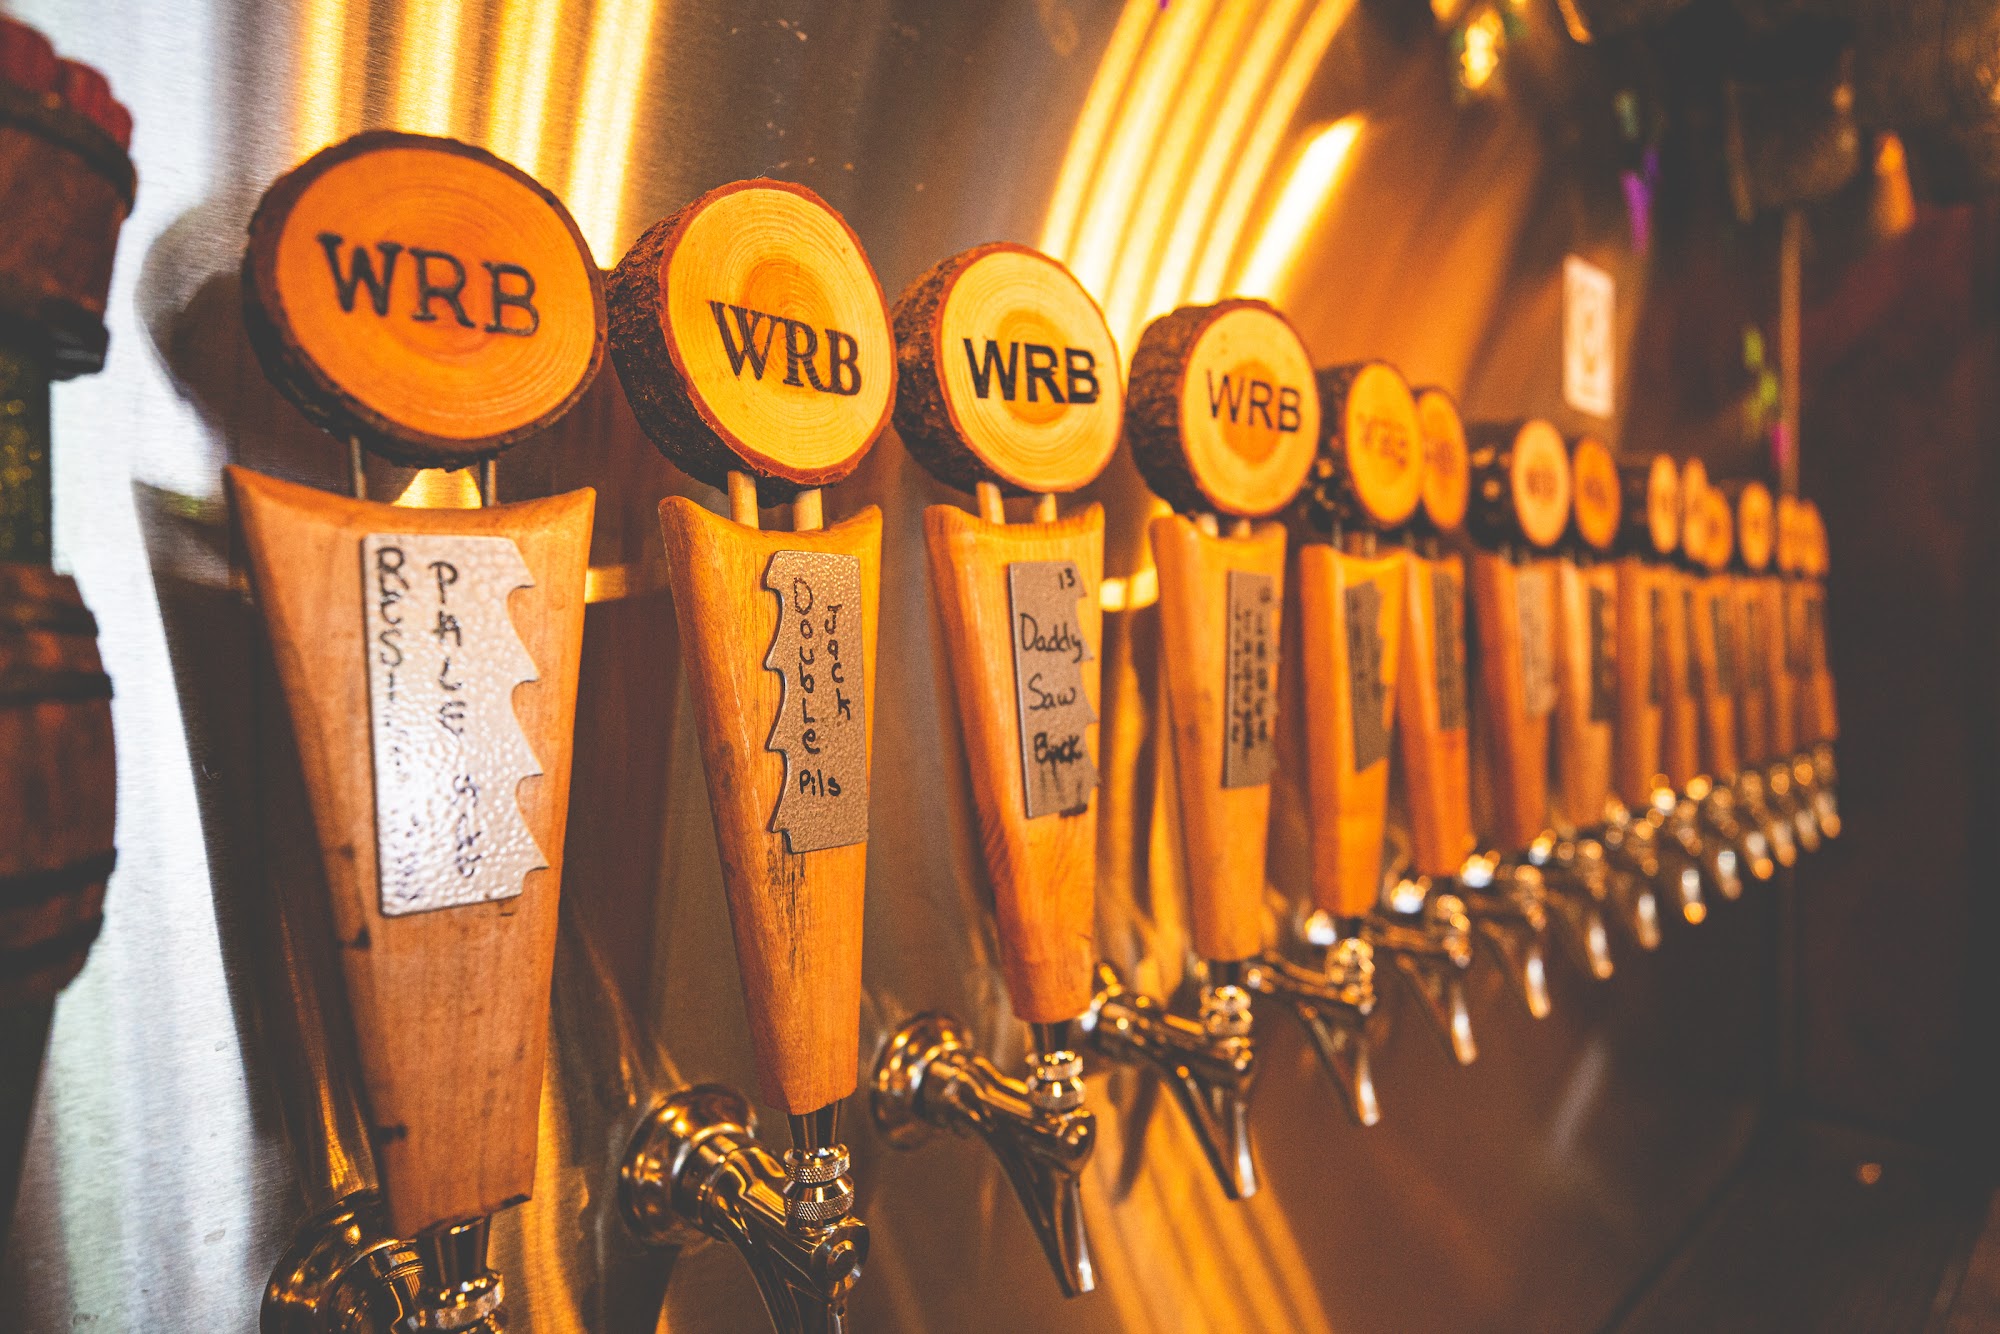 Western Red Brewing